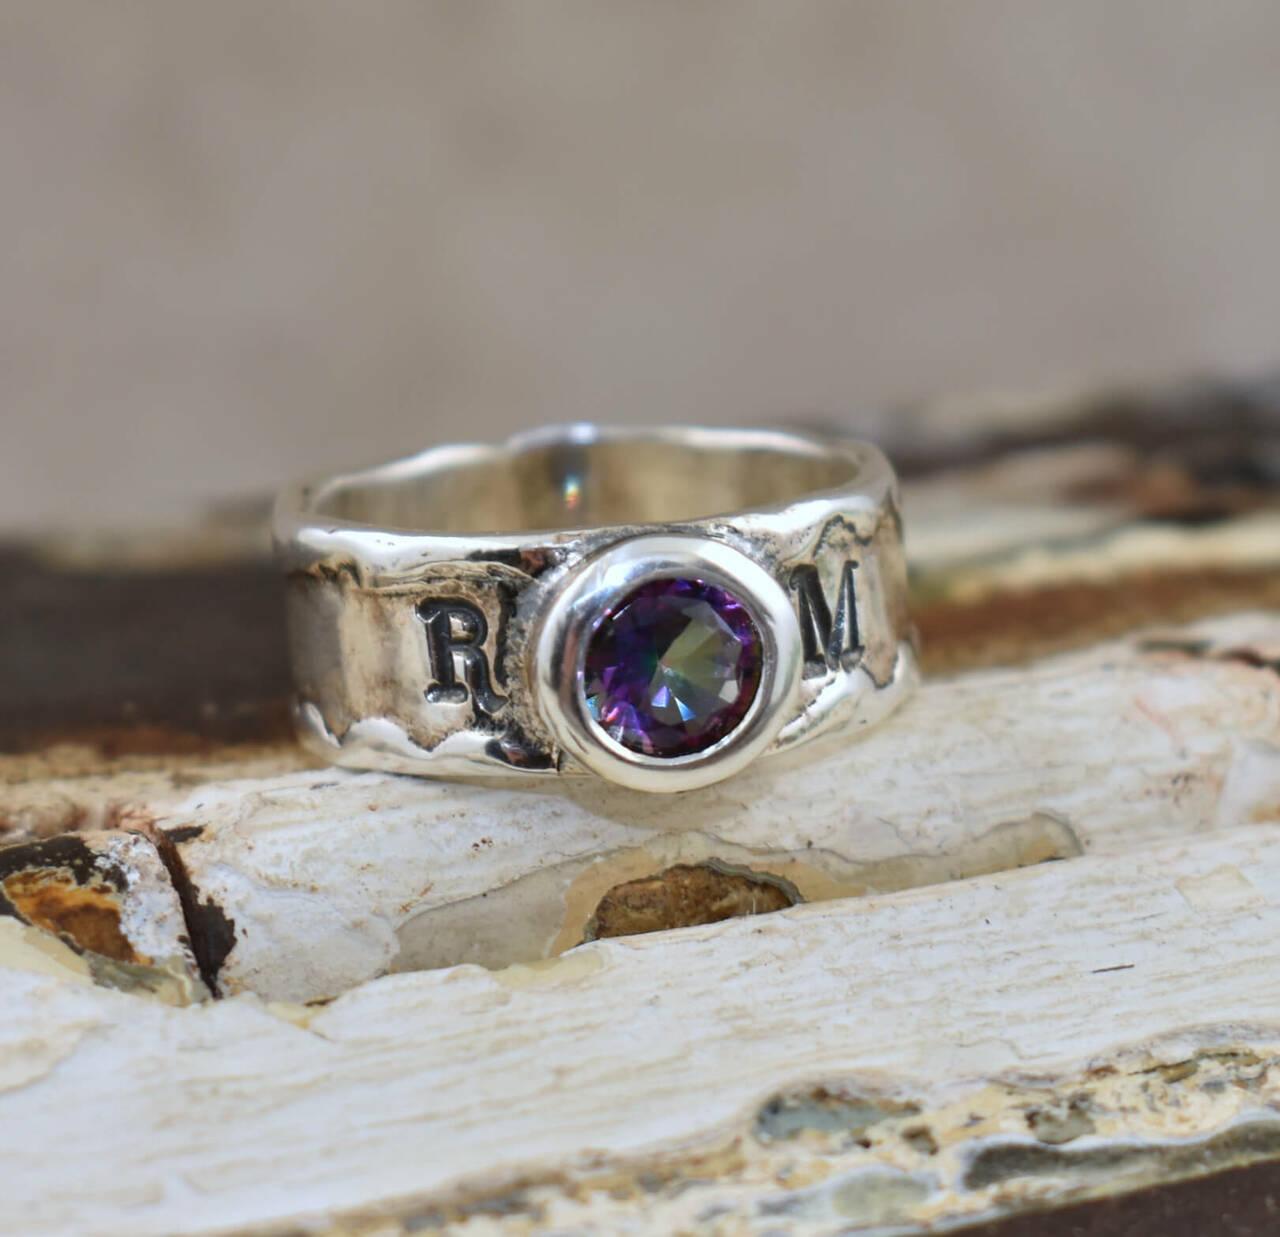 Handcrafted sterling silver and mystic topaz